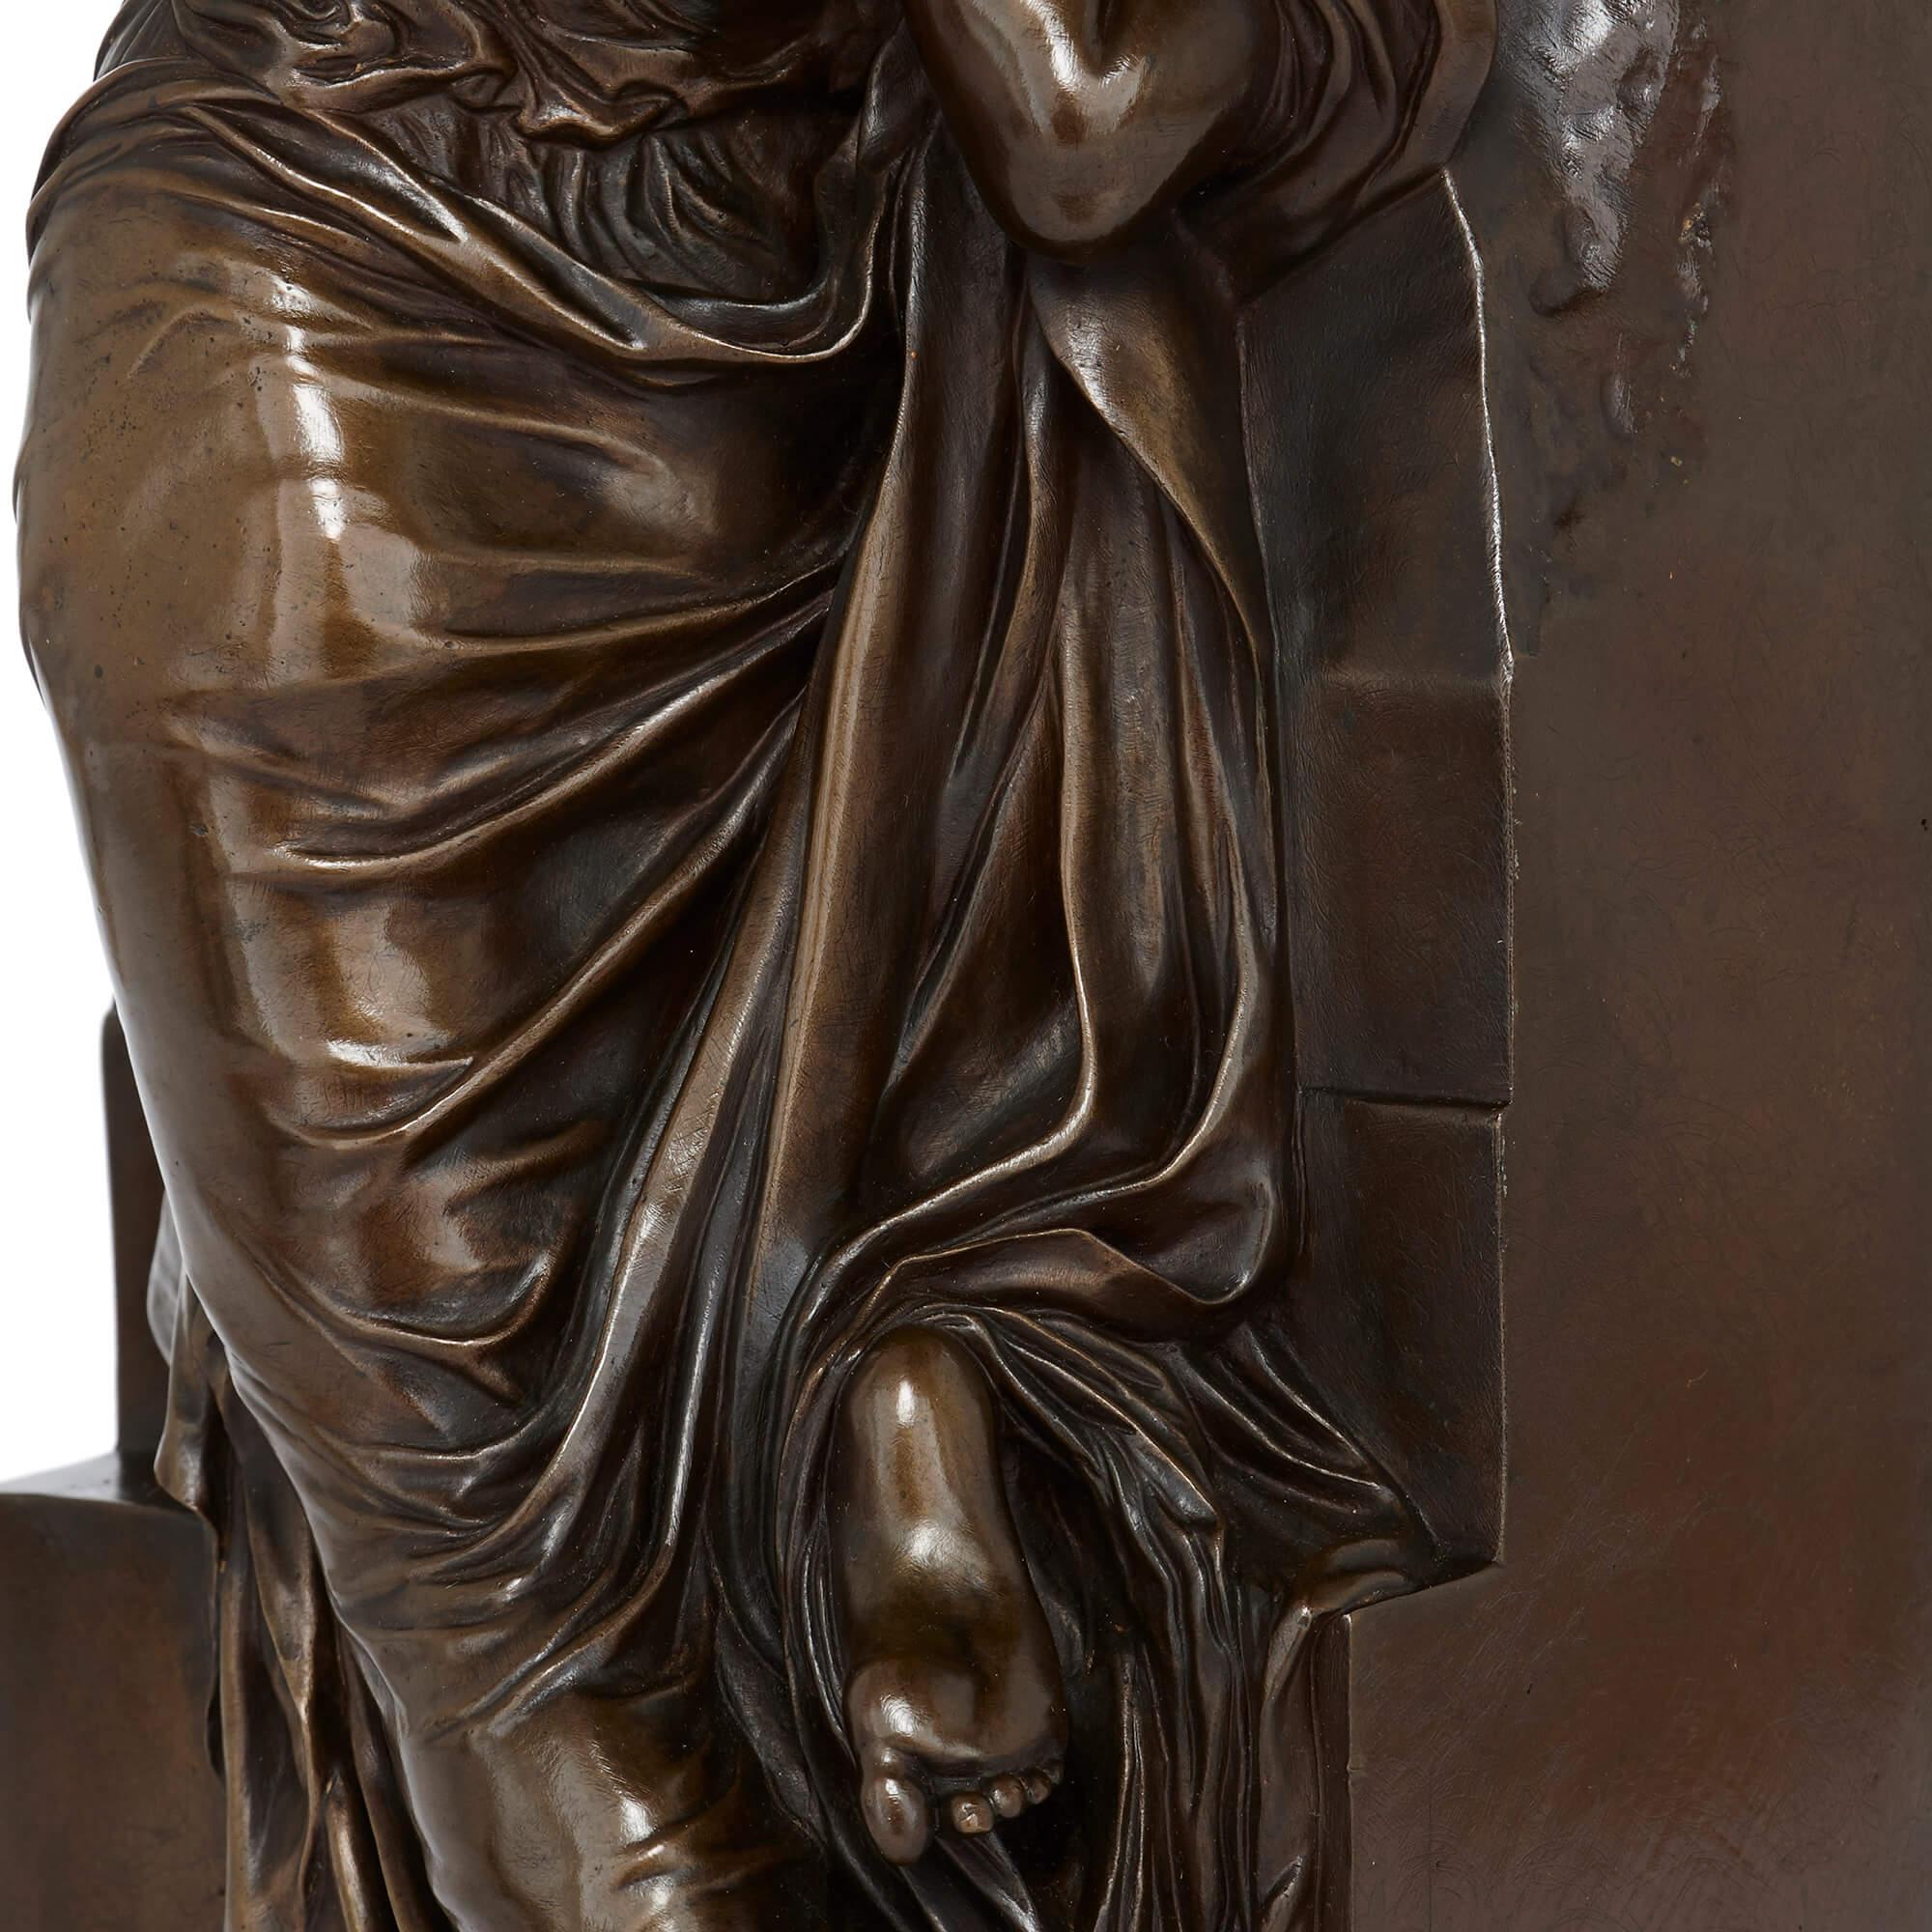 Neoclassical 'La Jeunesse' 19th Century bronze sculpture by Chapu and Barbedienne  For Sale